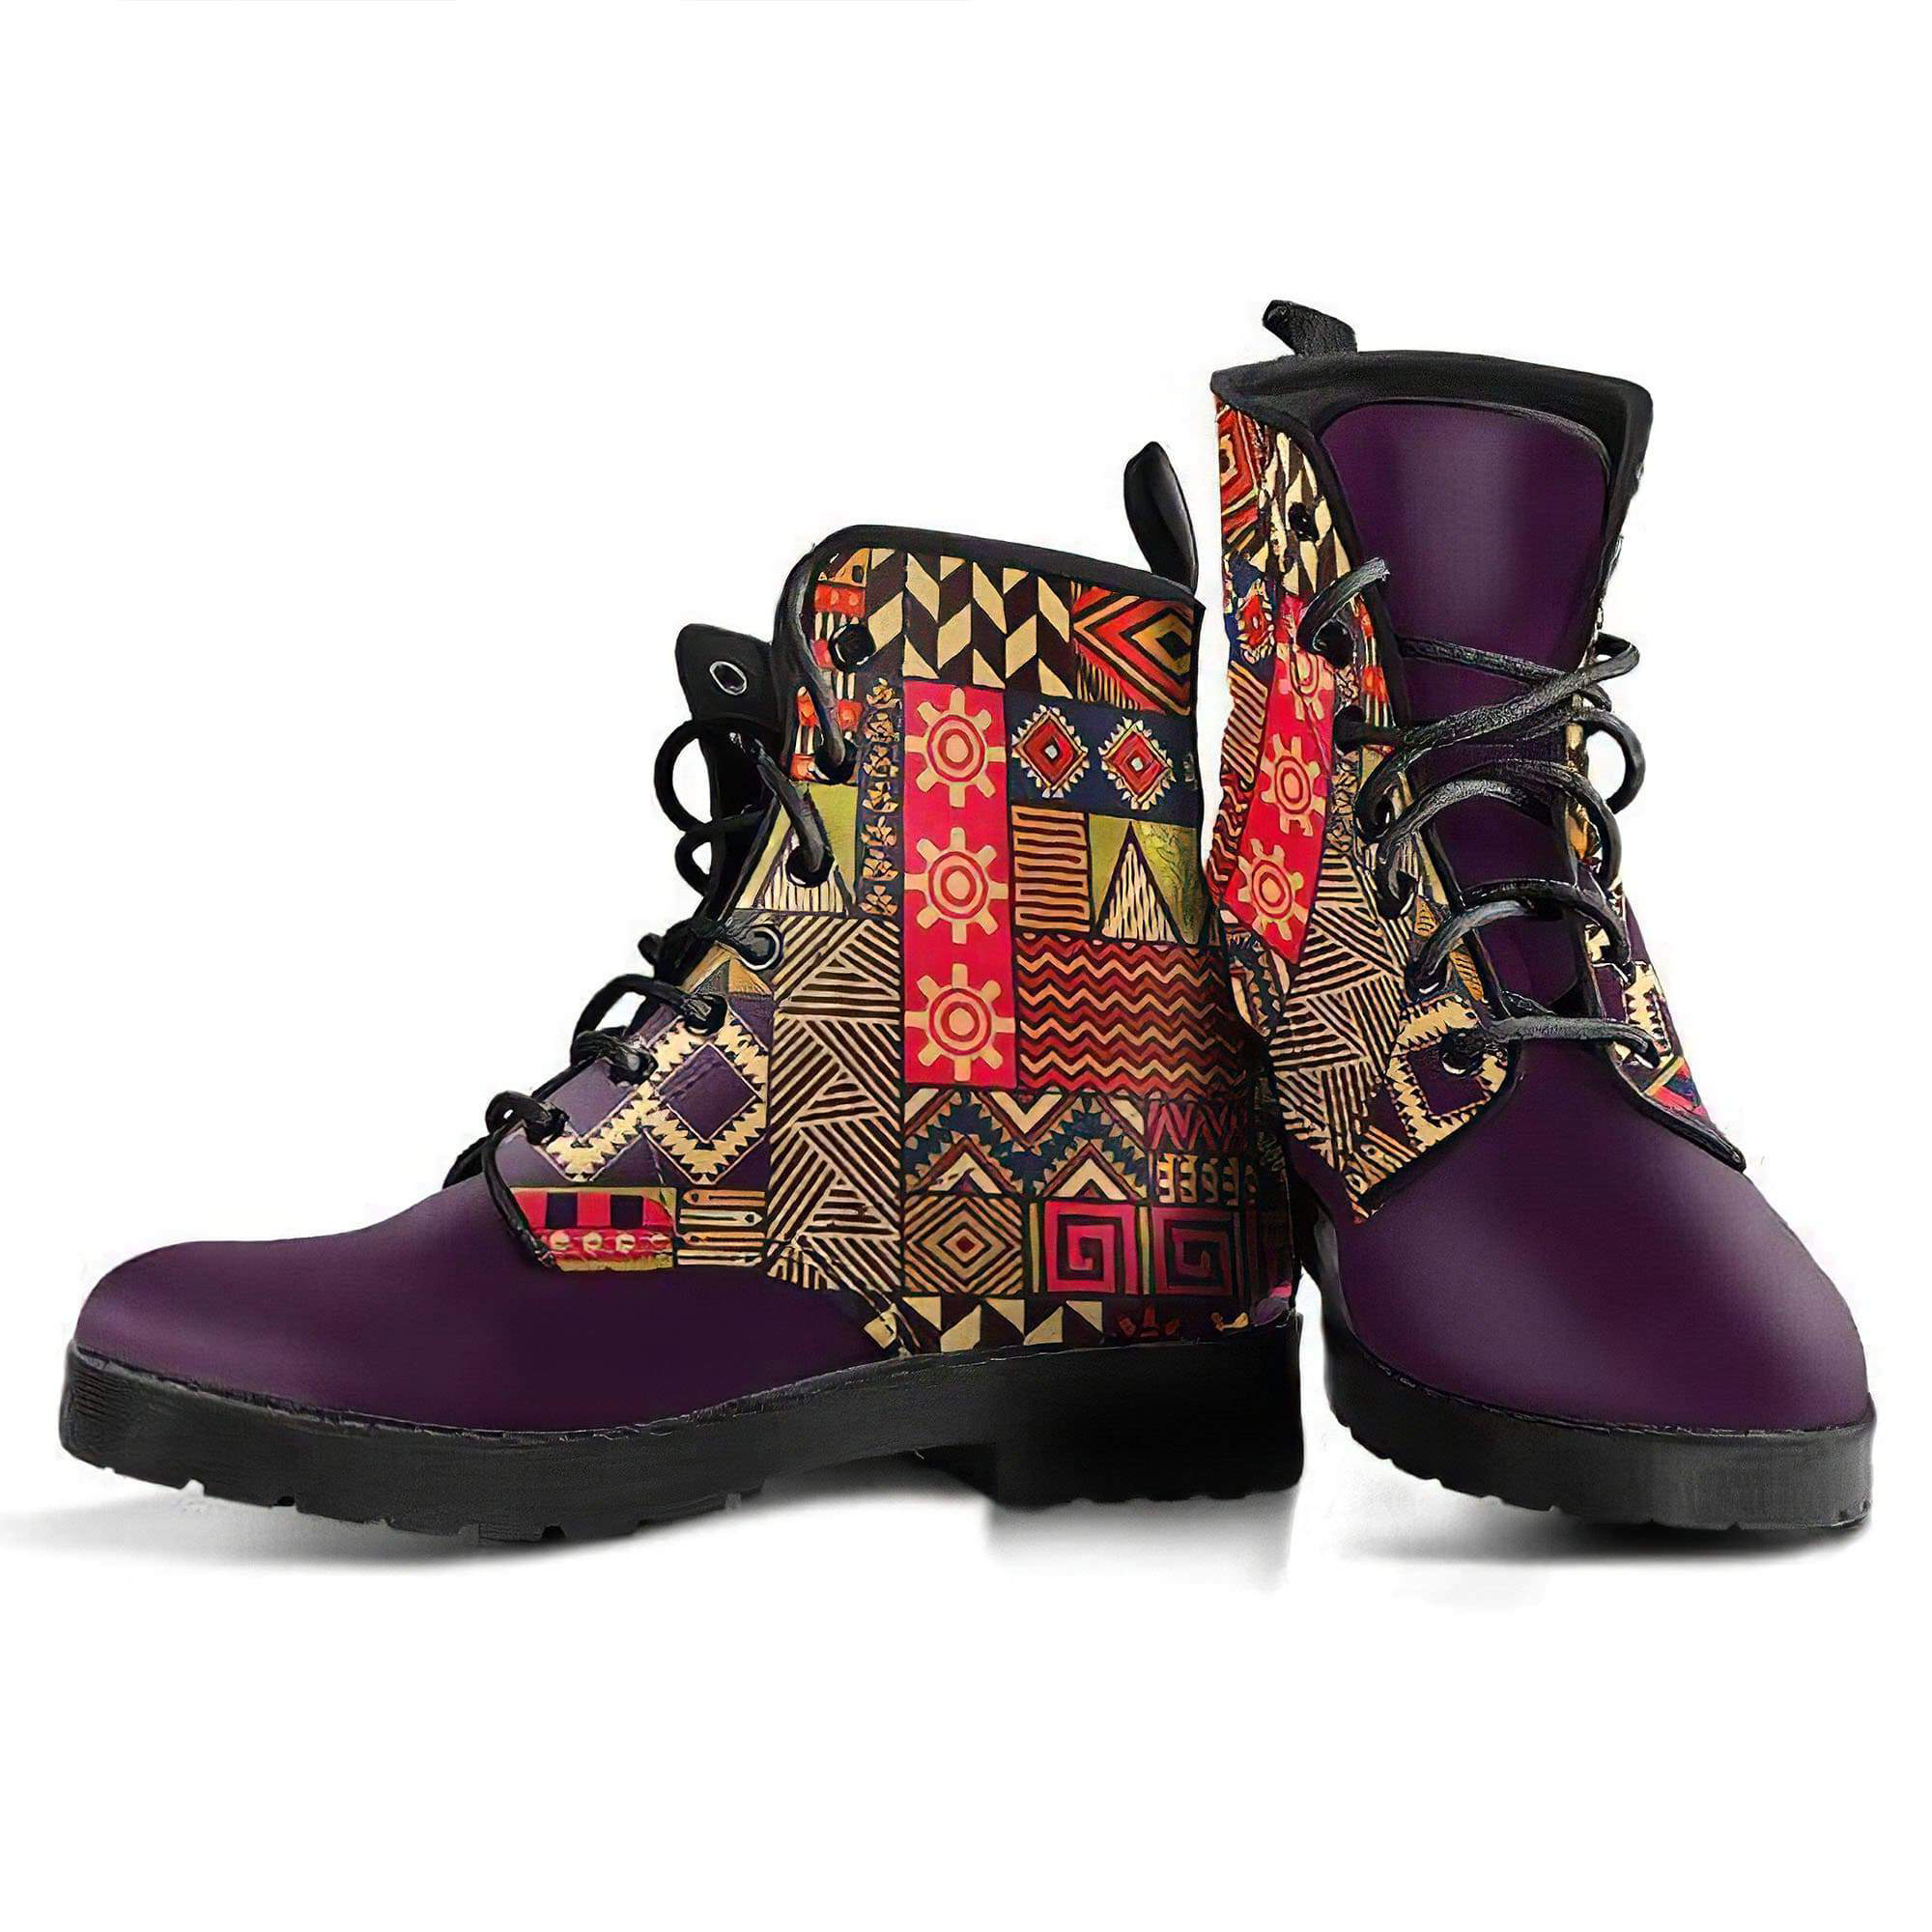 playful-pattern-handcrafted-boots-women-s-leather-boots-12051932053565.jpg